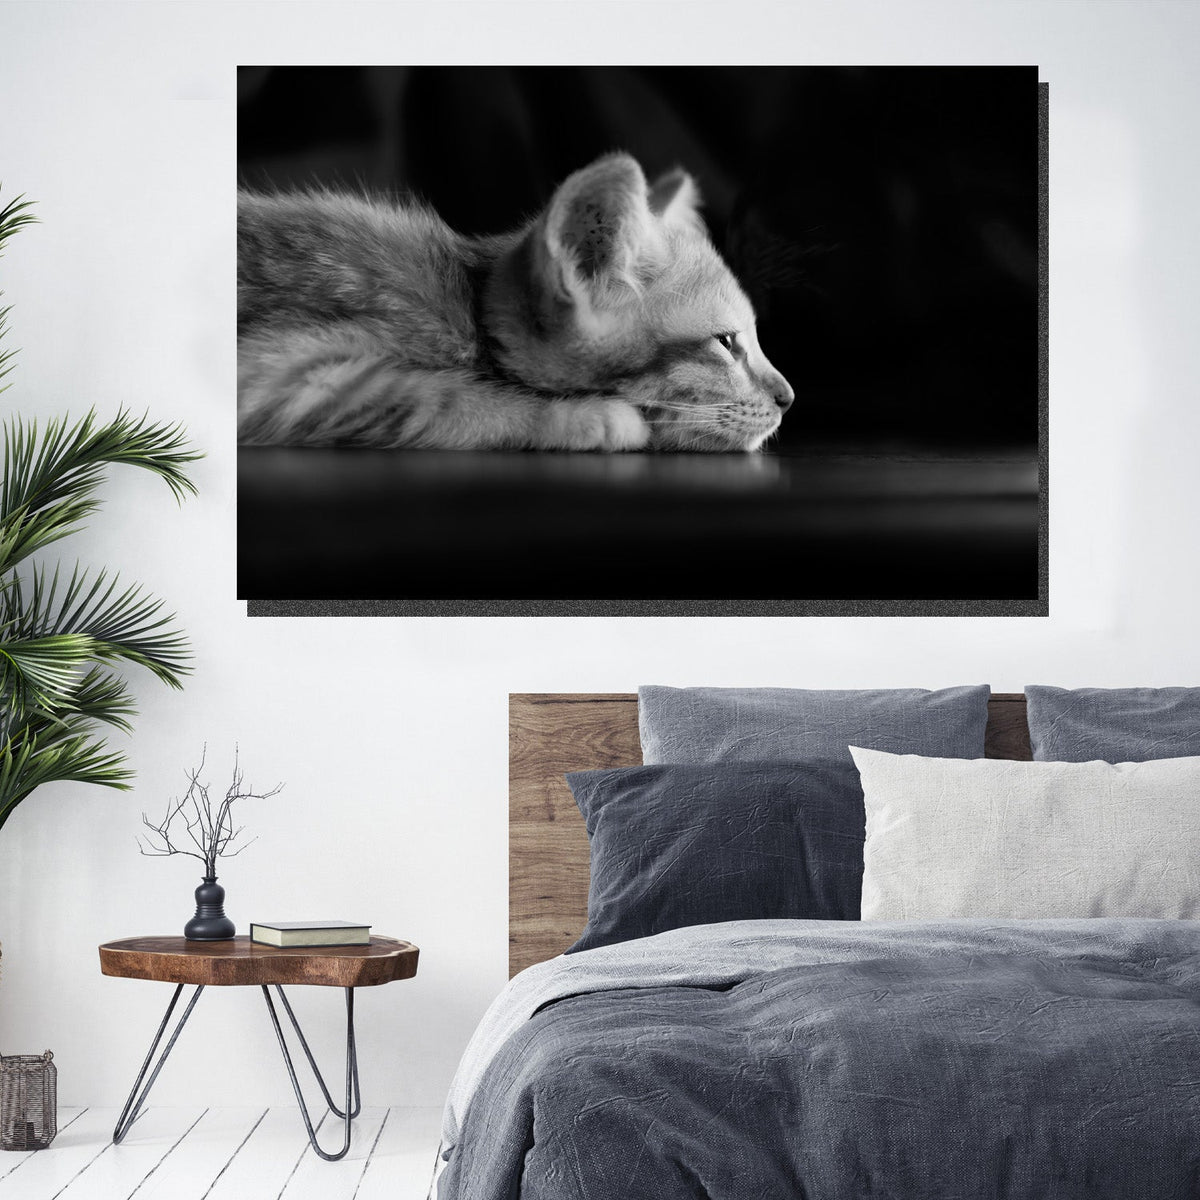 https://cdn.shopify.com/s/files/1/0387/9986/8044/products/LazyKittenCanvasArtprintStretched-2.jpg